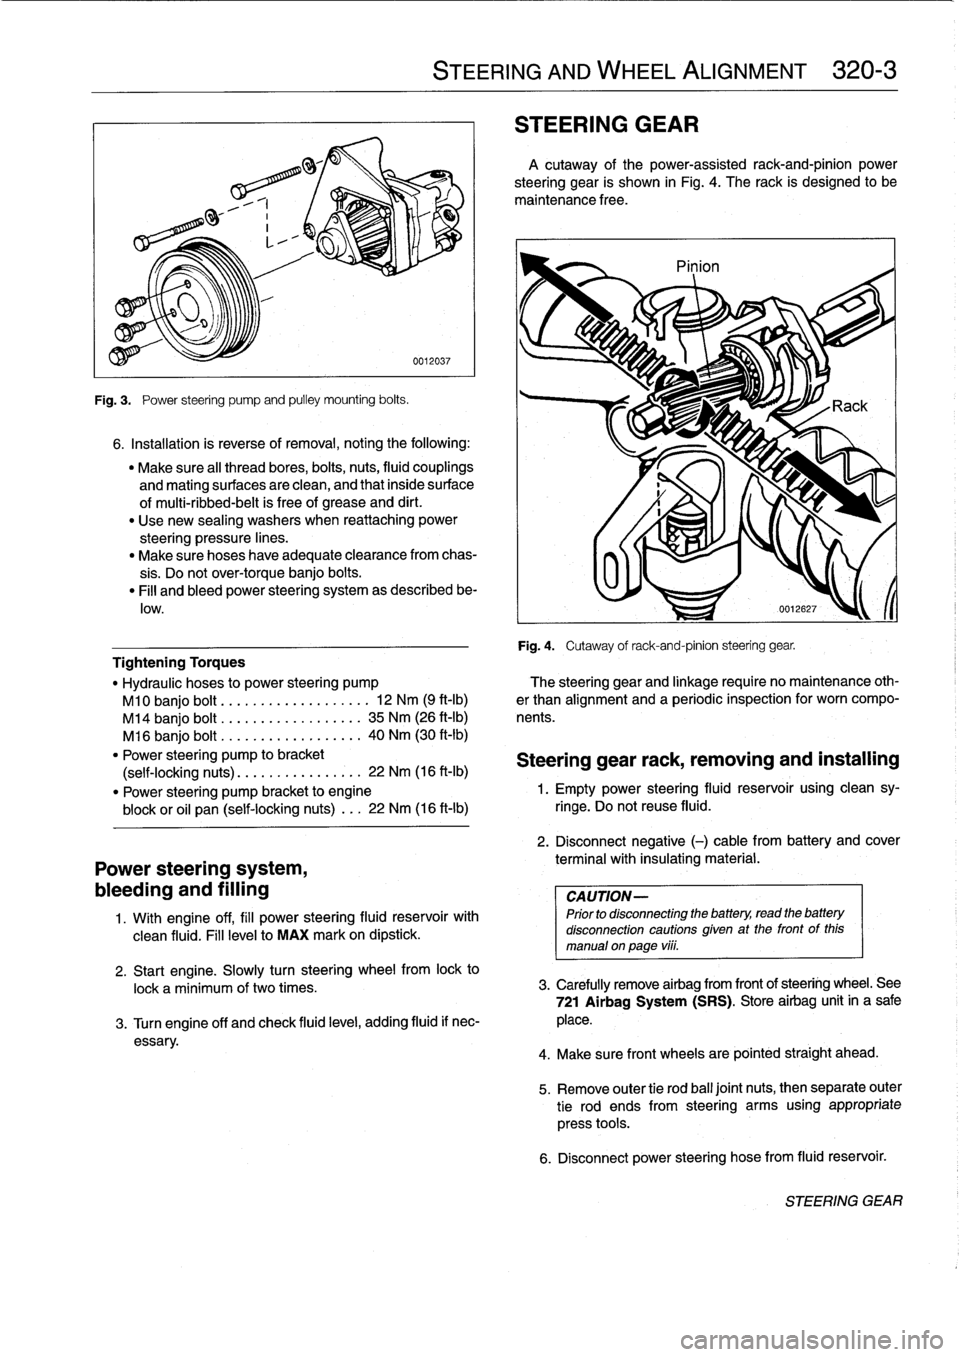 BMW 323i 1993 E36 User Guide 
Fig
.
3
.

	

Power
steering
pump
and
pulley
mounting
bolts
.

6
.
Installation
is
reverse
of
removal,
noting
the
following
:

"
Make
sure
al¡
thread
bores,
bolts,
nuts,
fluid
couplings

and
mating
